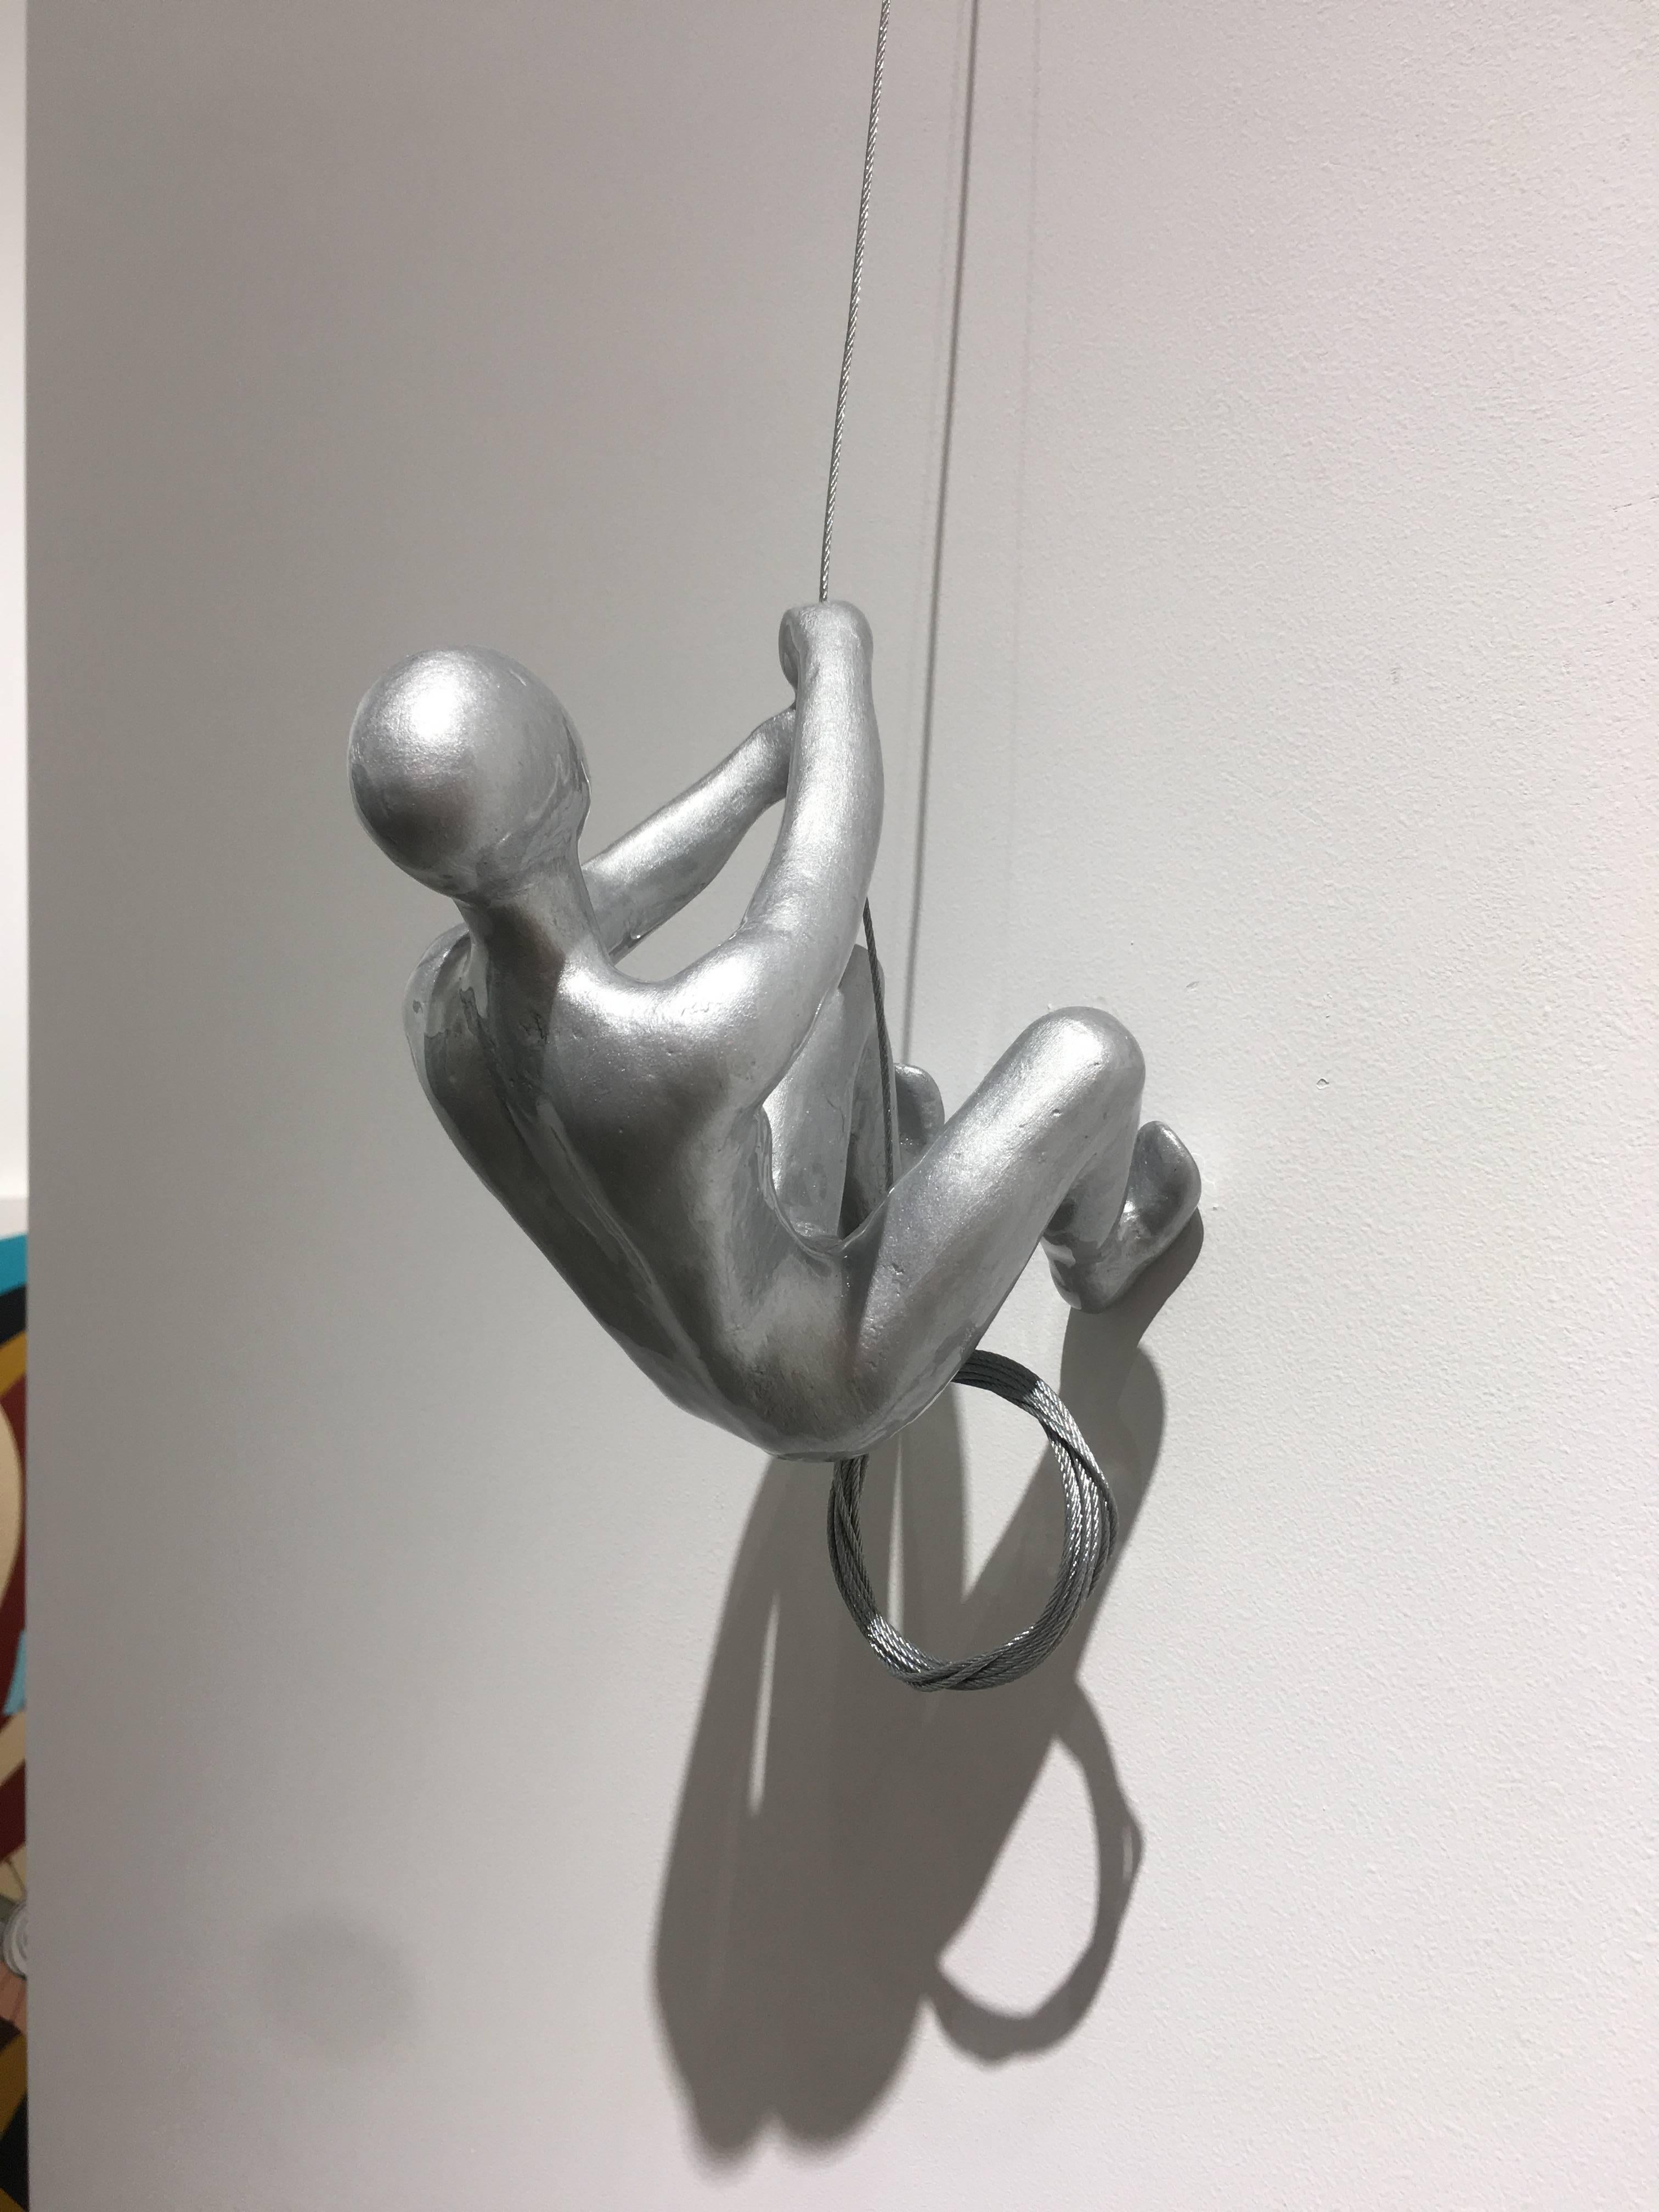 Silver Climber
MARIN
10" x 6" 
Fiberglass and volcanic rock
Easy to hang, ready to install
Comes with steel cable, small screw, and white cap

Commissions Available

MARIN
Born in Colombia, Marin first received formal art training in the 1980s at